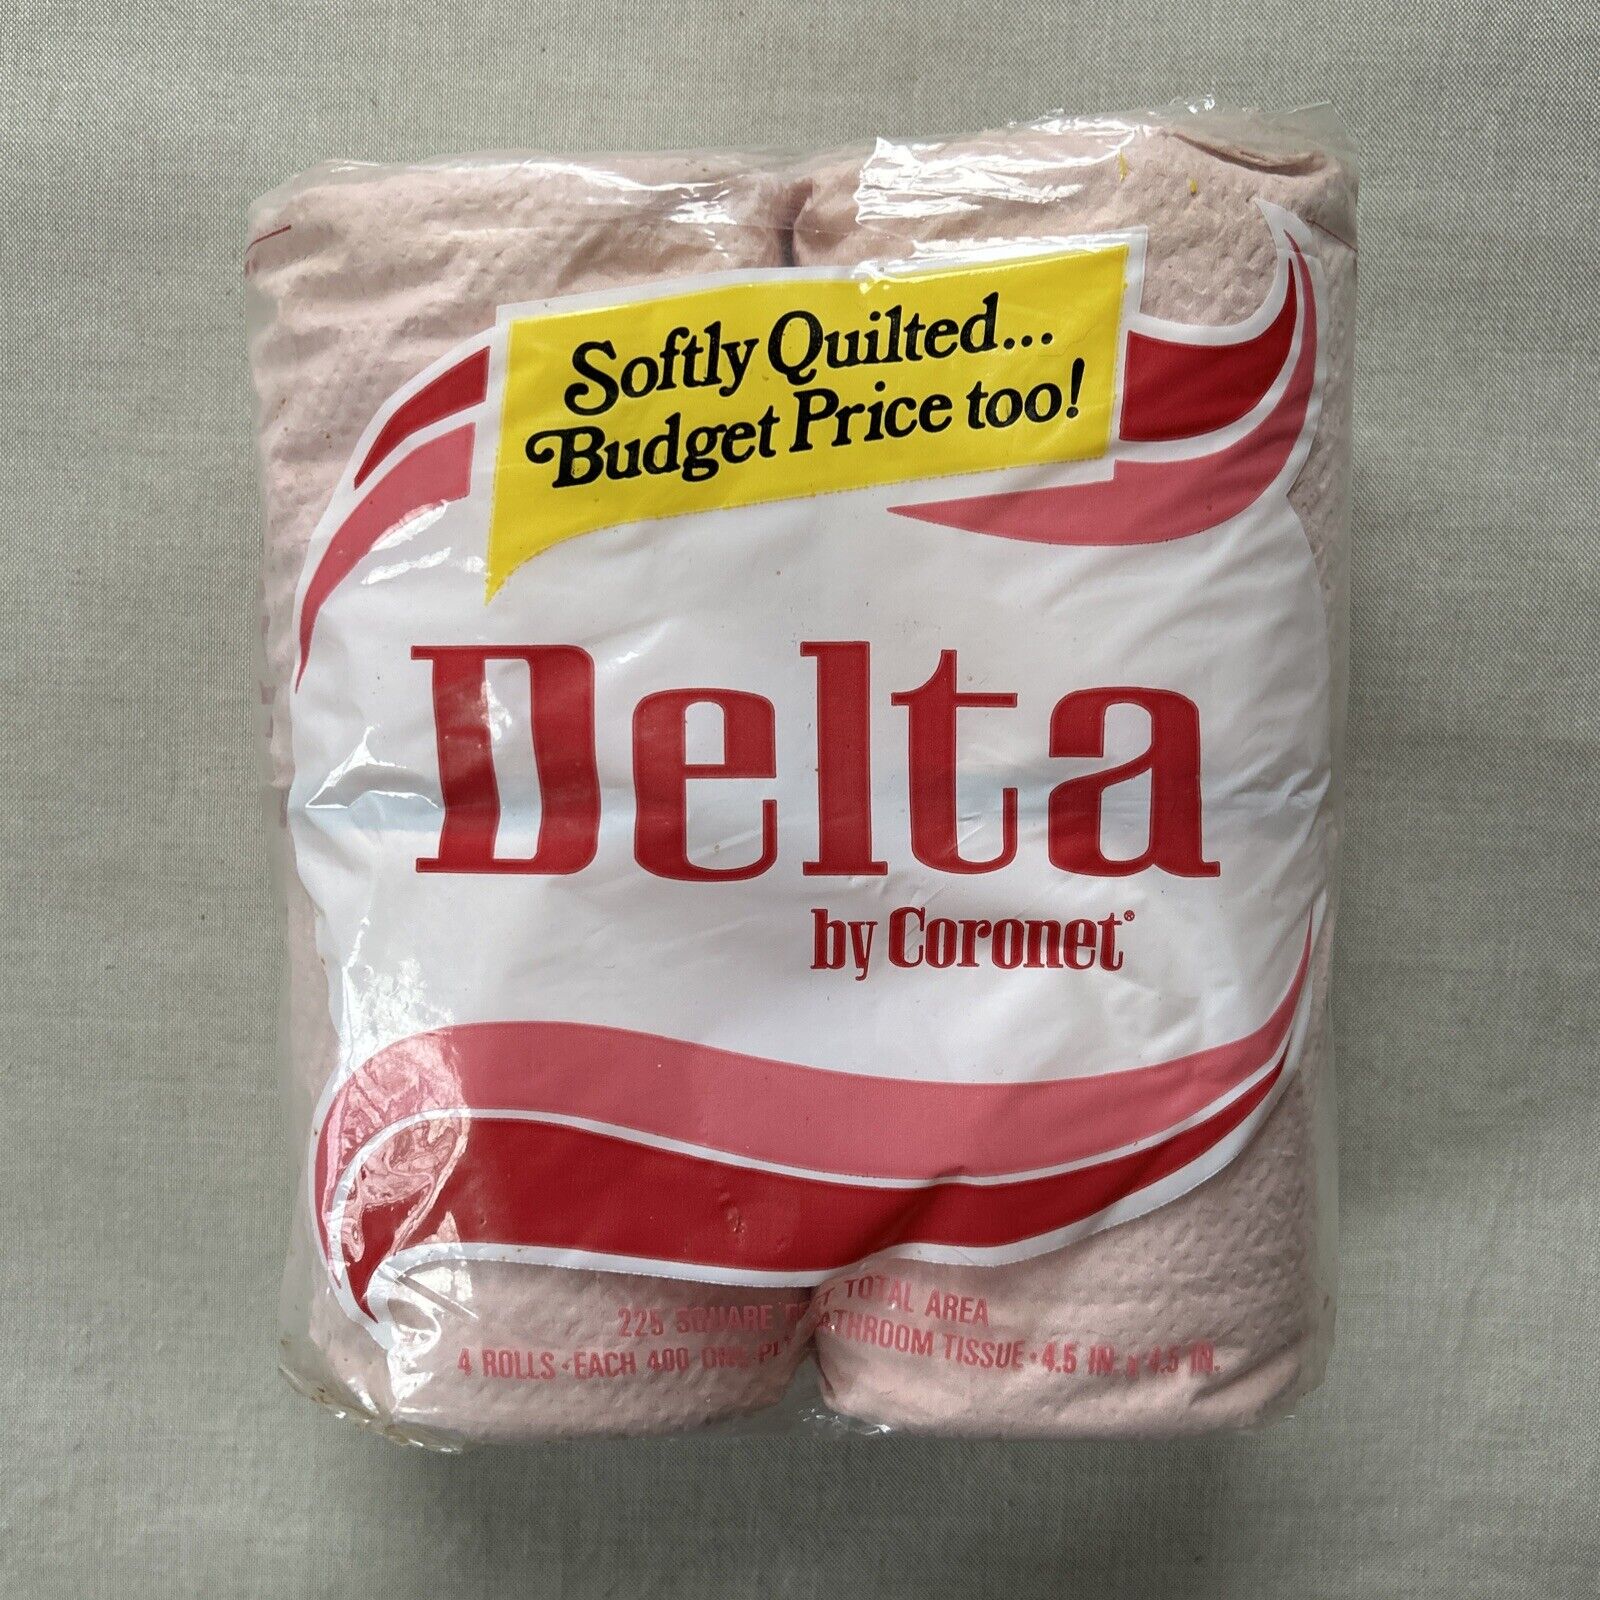 Vtg 1970s DELTA by CORONET Pink Toilet Paper Mid-Century Bathroom Tissue Quilted